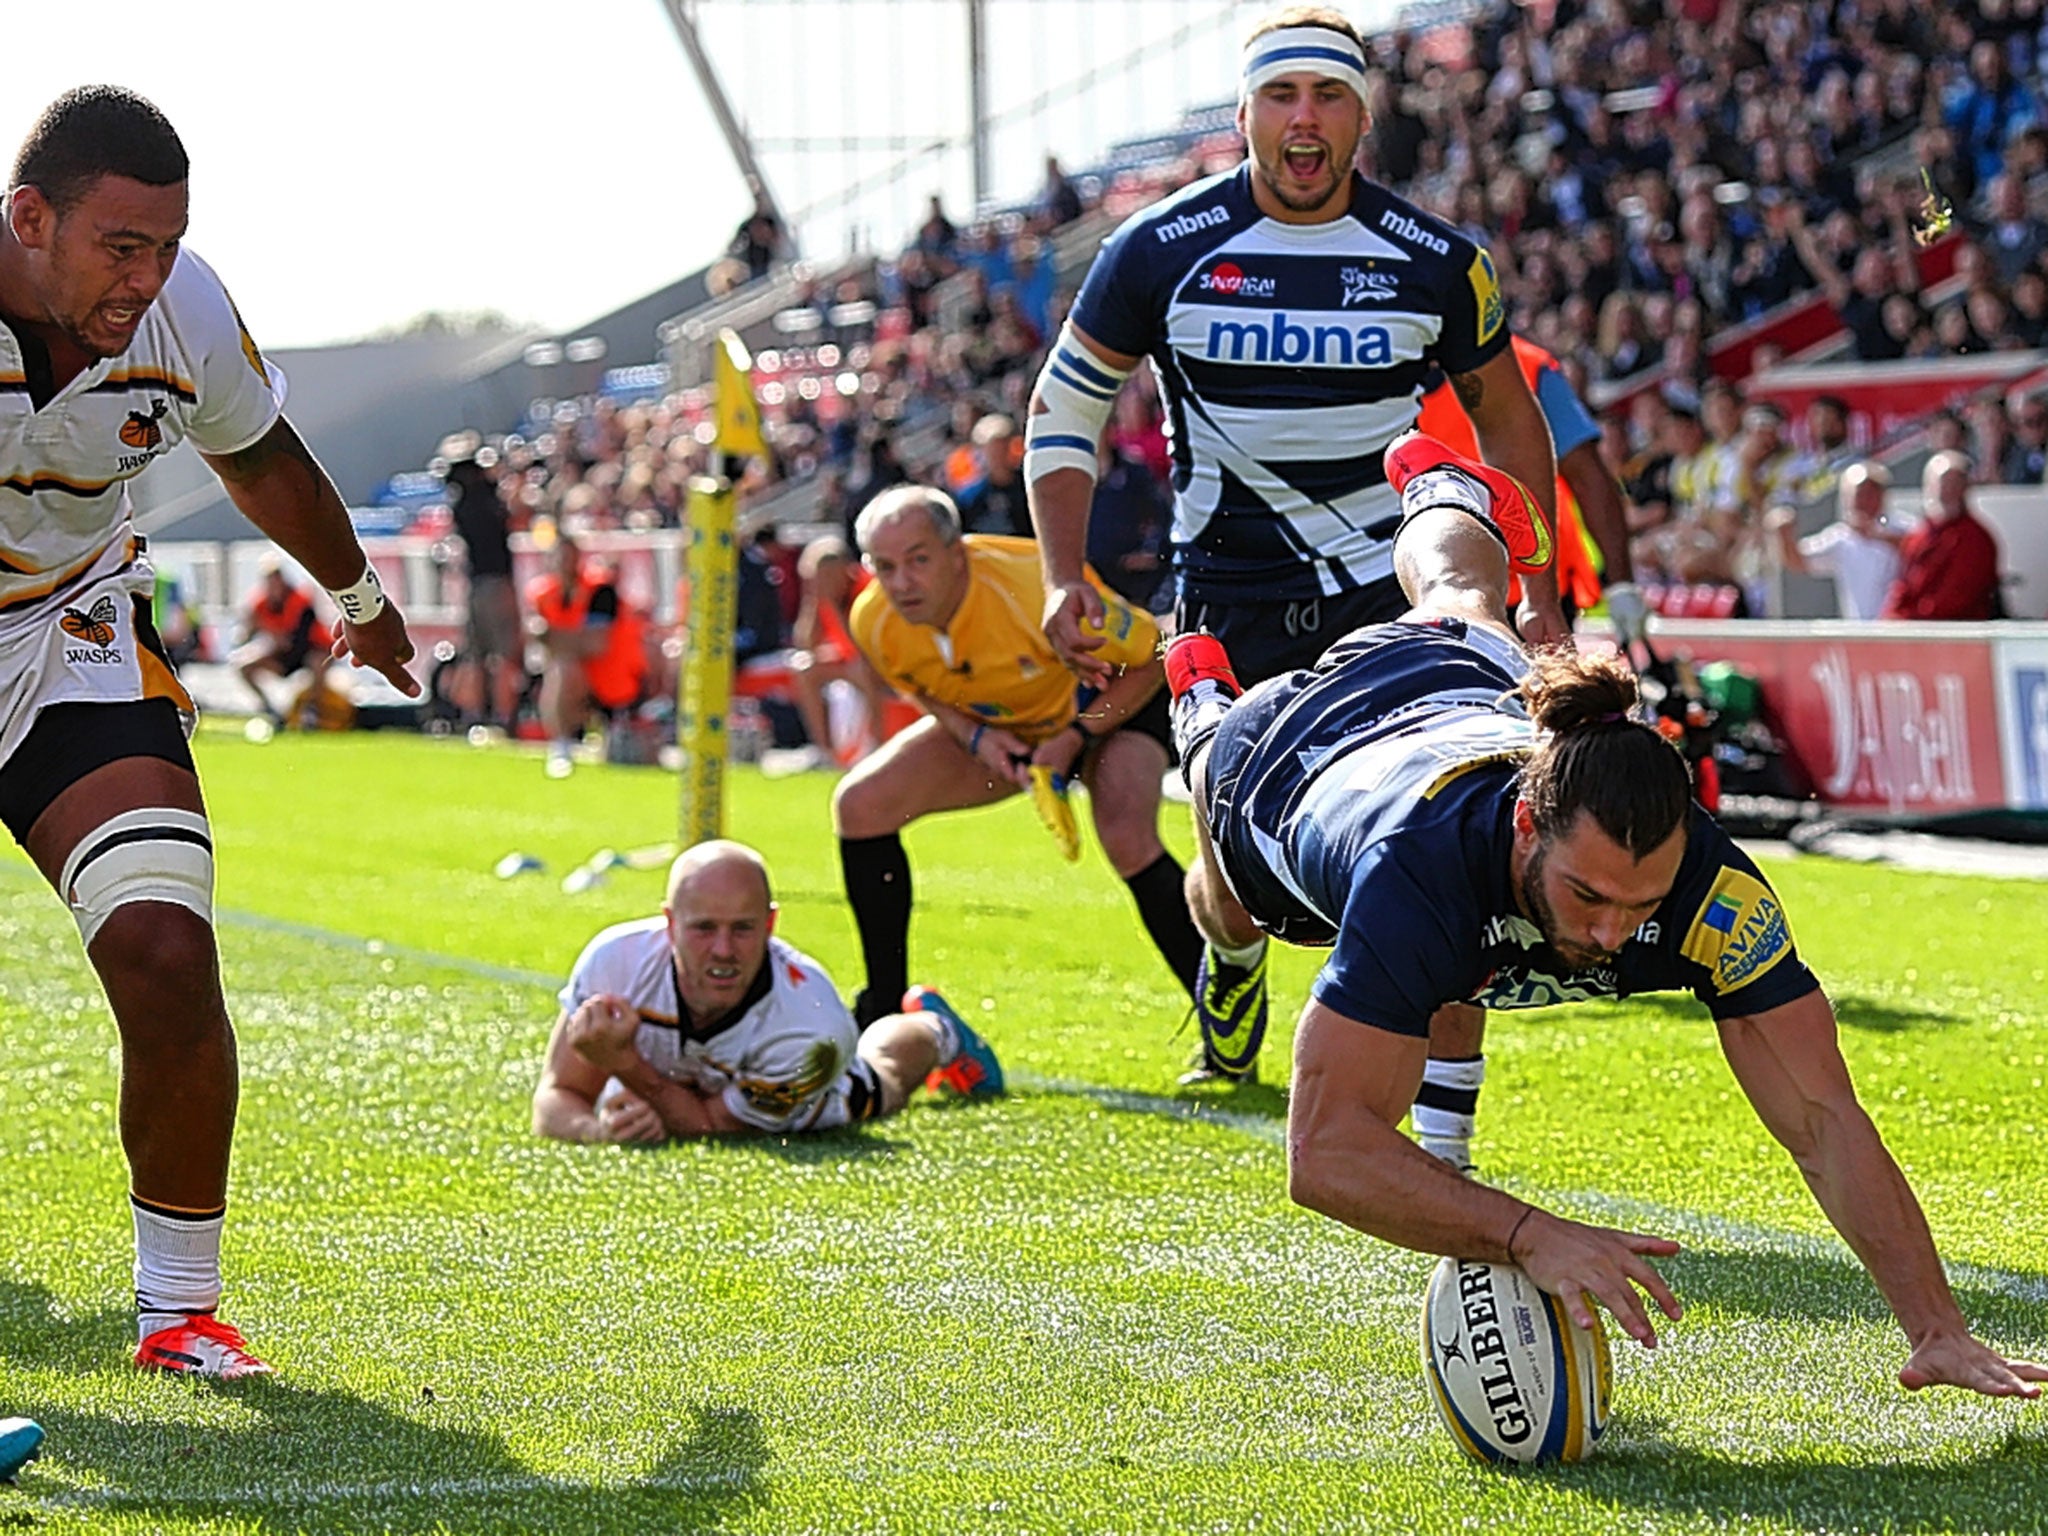 Tom Arscott goes over for Sale’s opening try against Wasps at the AJ Bell Stadium today